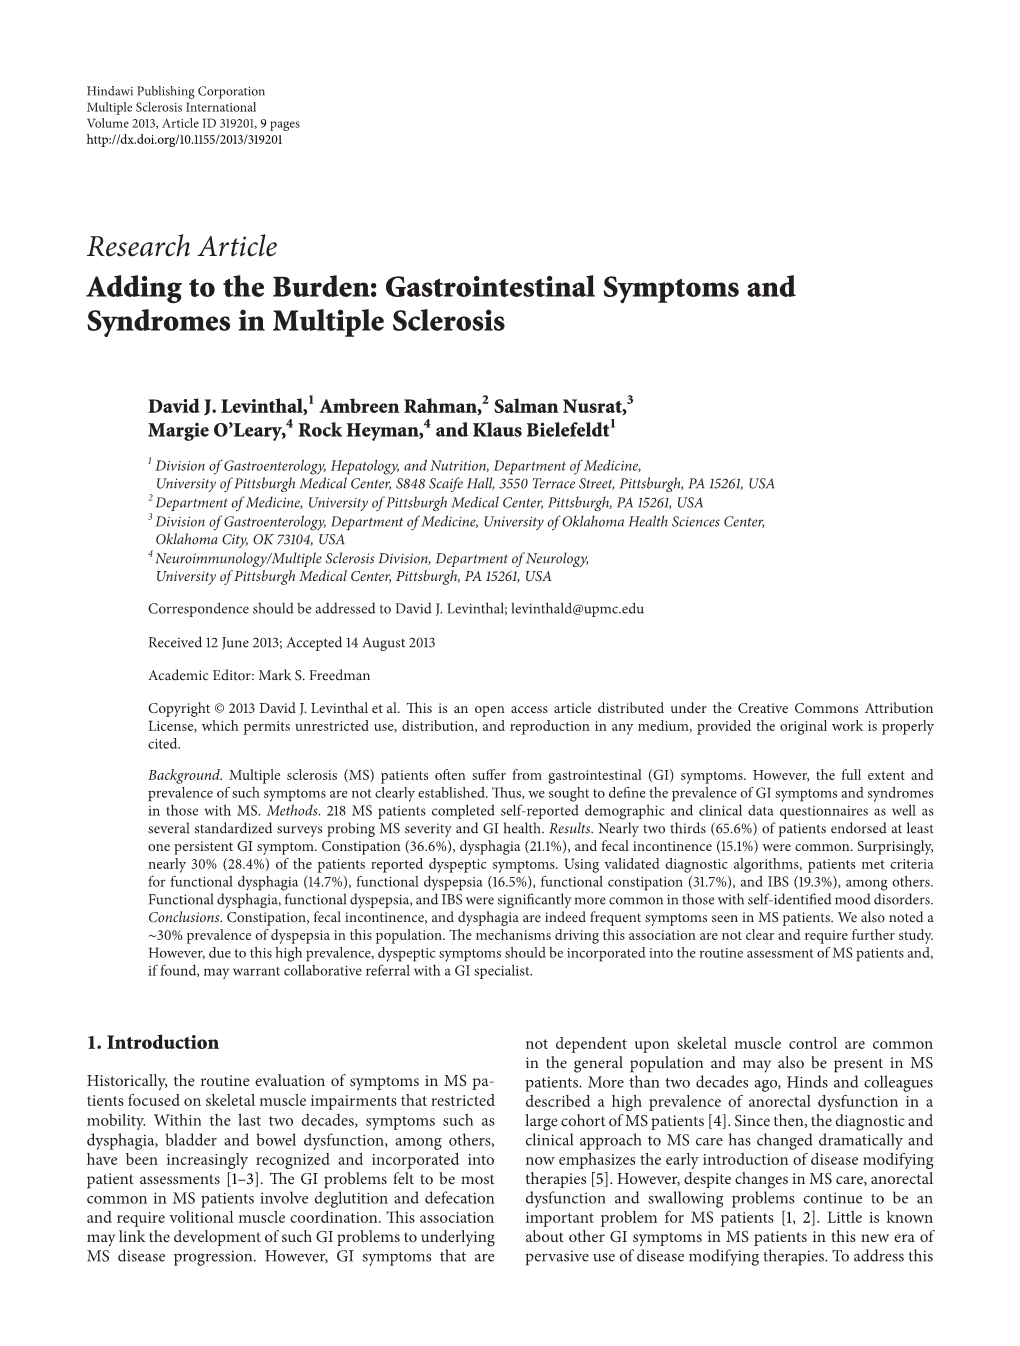 Adding to the Burden: Gastrointestinal Symptoms and Syndromes in Multiple Sclerosis